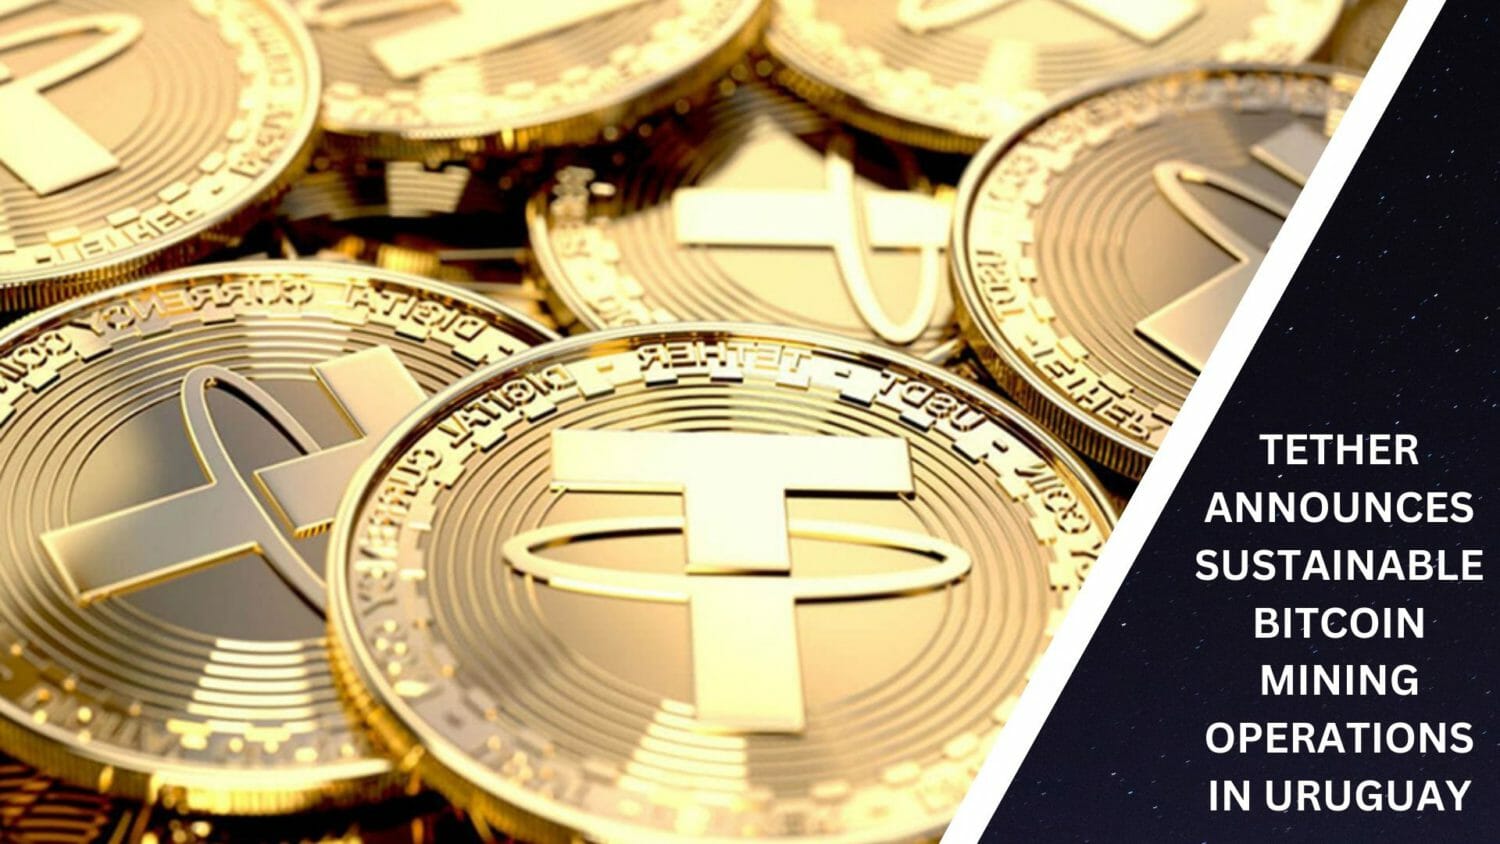 Tether Announces Sustainable Bitcoin Mining Operations In Uruguay